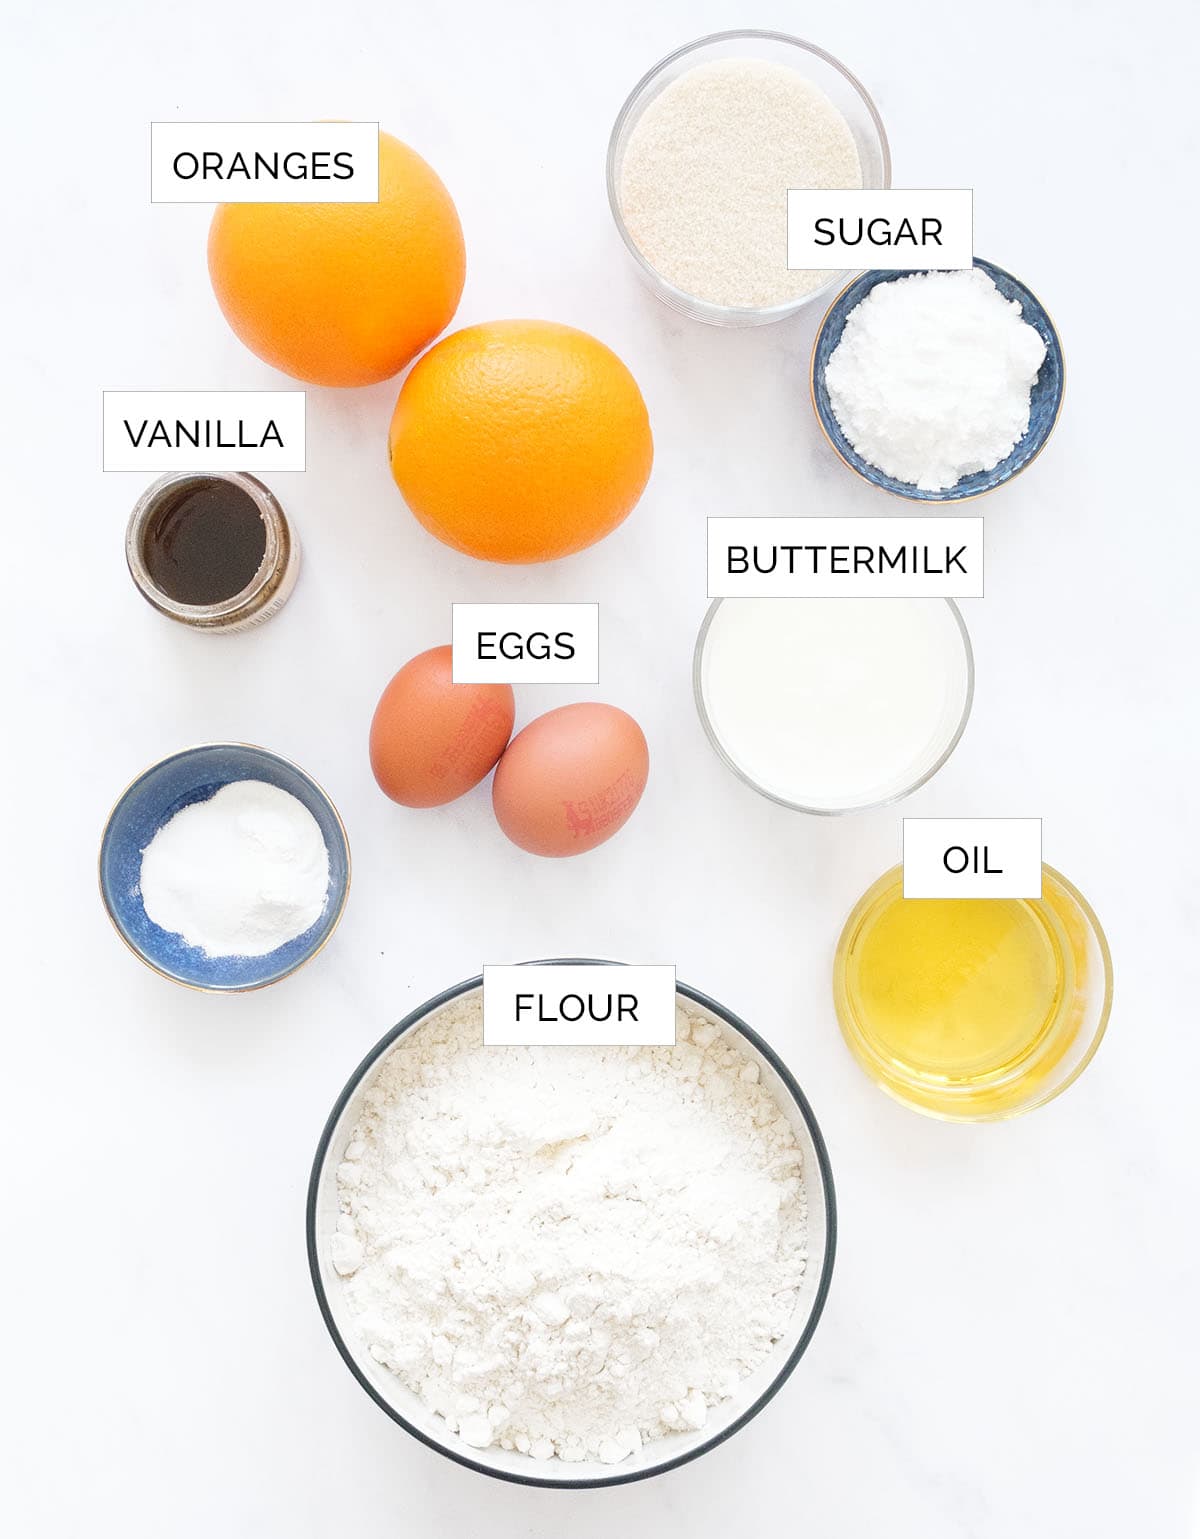 Top view of the ingredients to make orange muffins arranged over a white background.